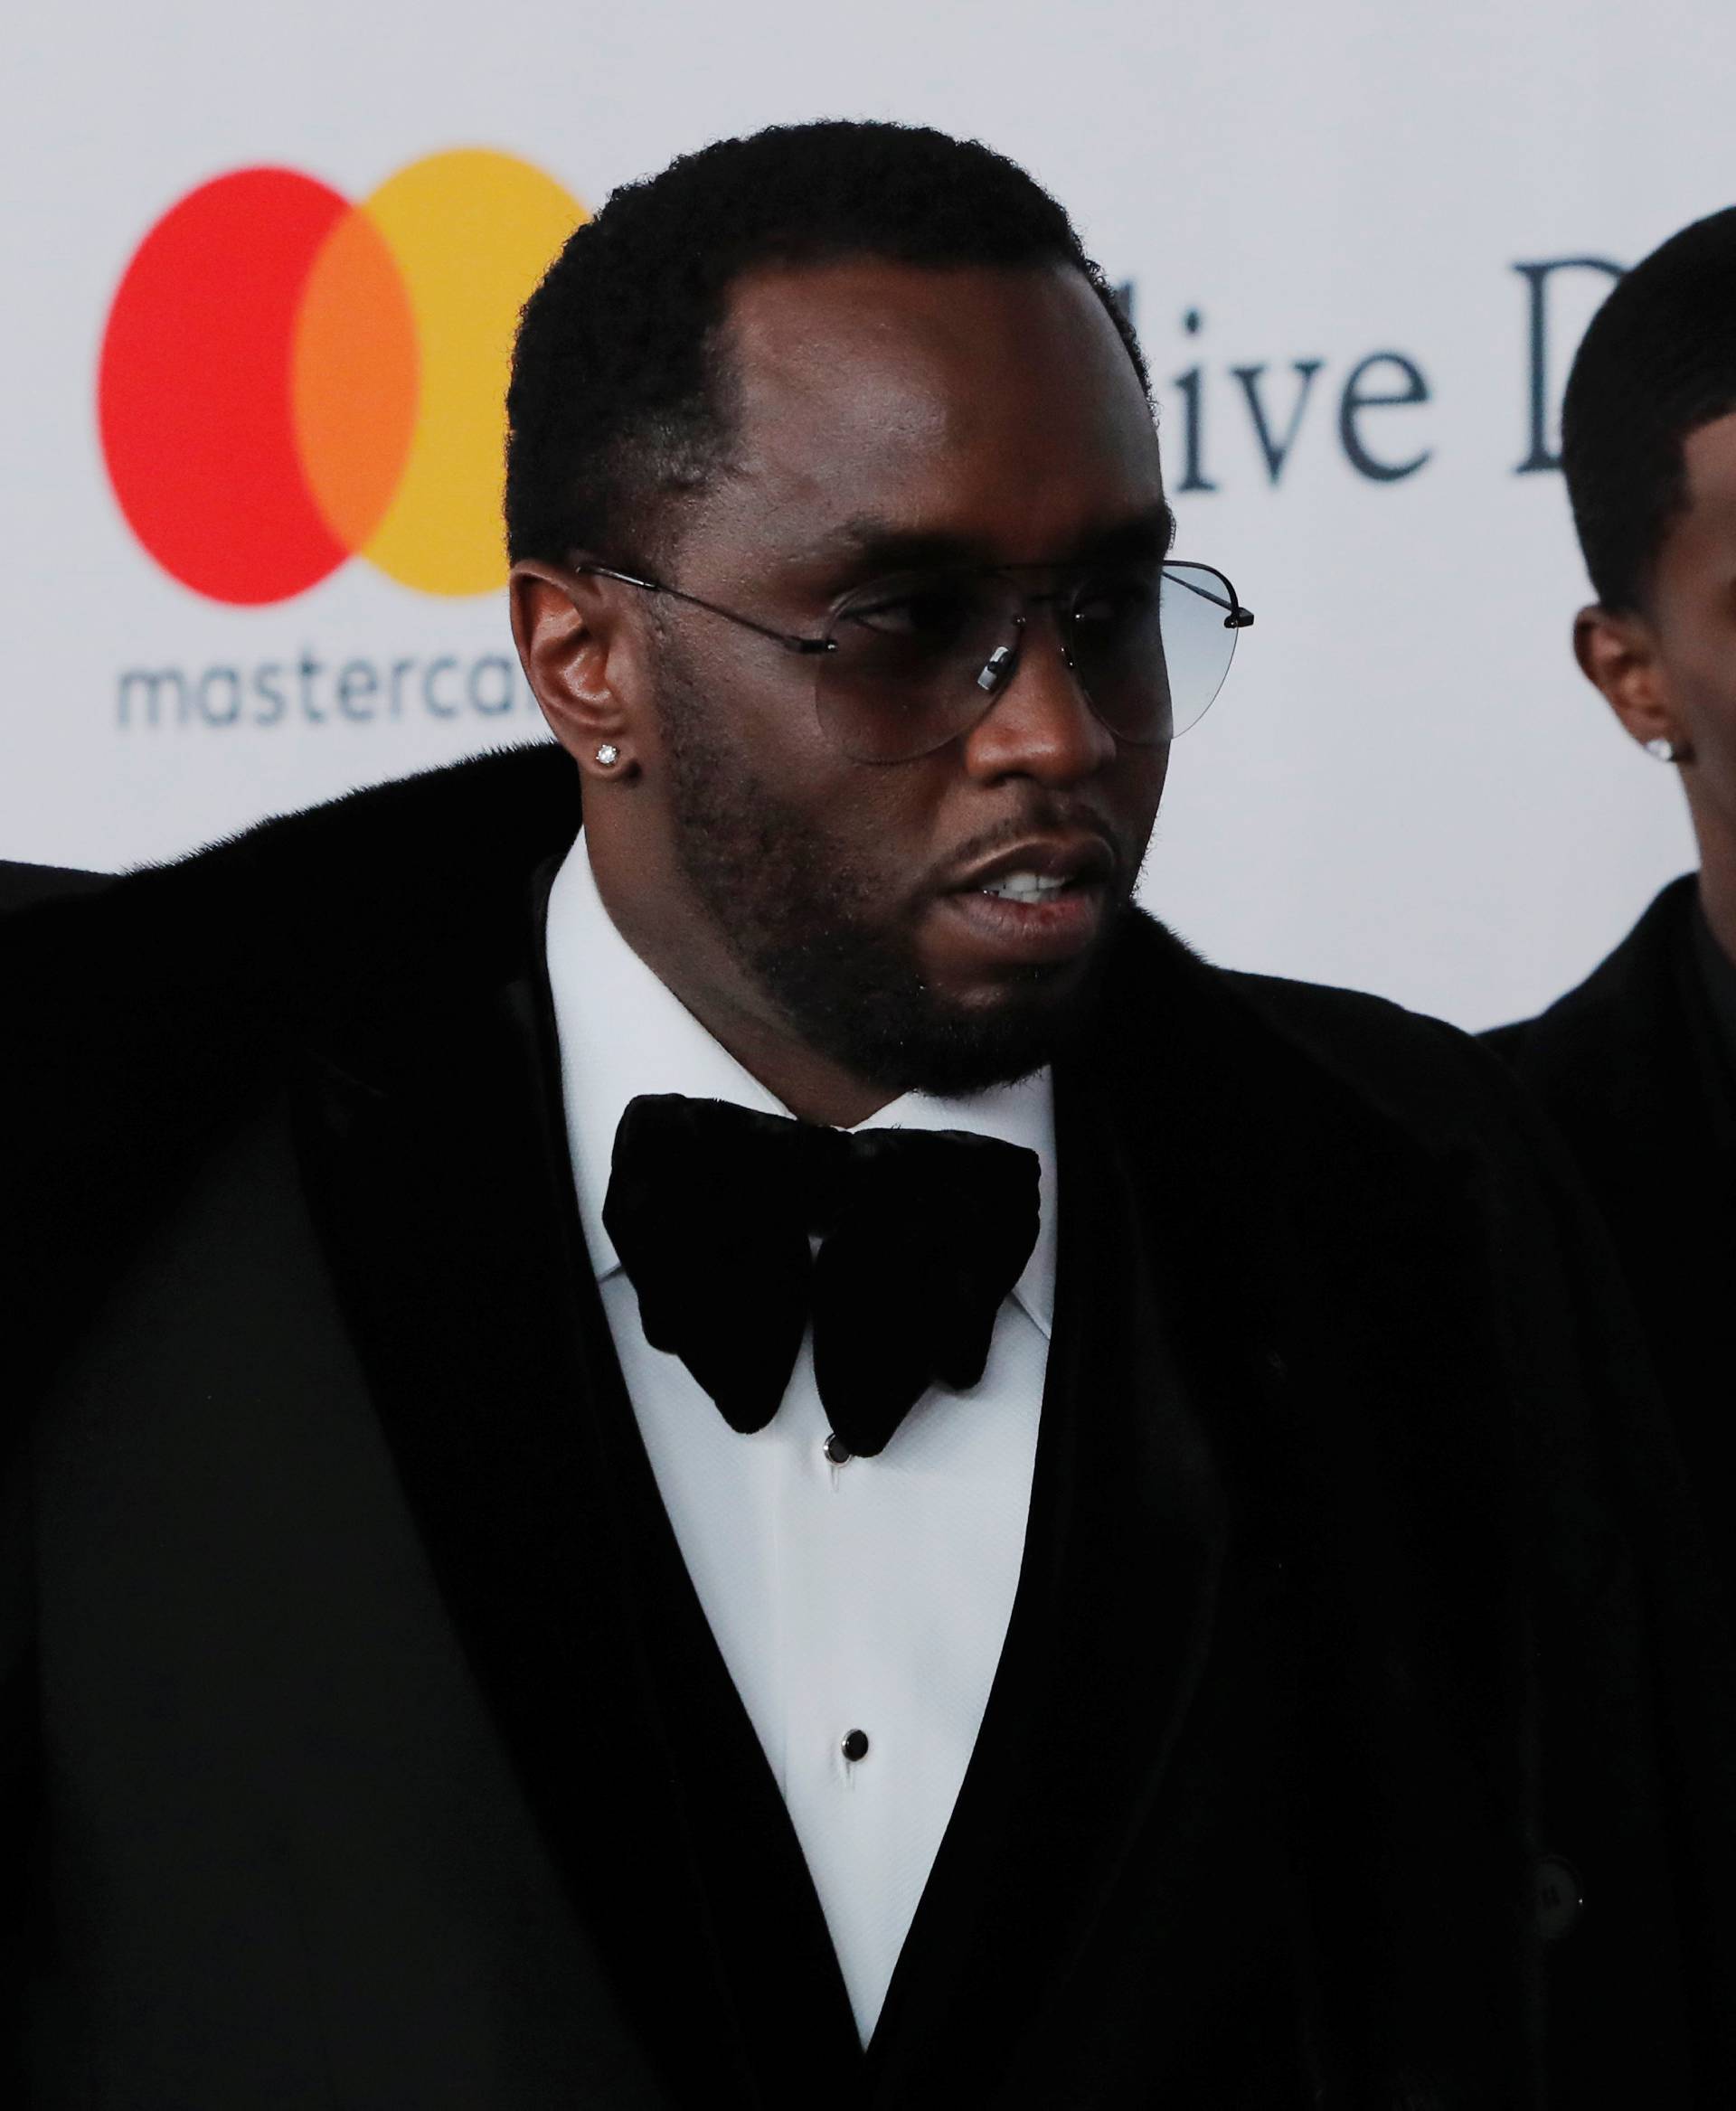 Sean "Diddy" Combs attends the 2018 Pre-GRAMMY Gala & GRAMMY Salute to Industry Icons presented by Clive Davis and The Recording Academy honoring Shawn "JAY-Z" Carter in Manhattan, New York